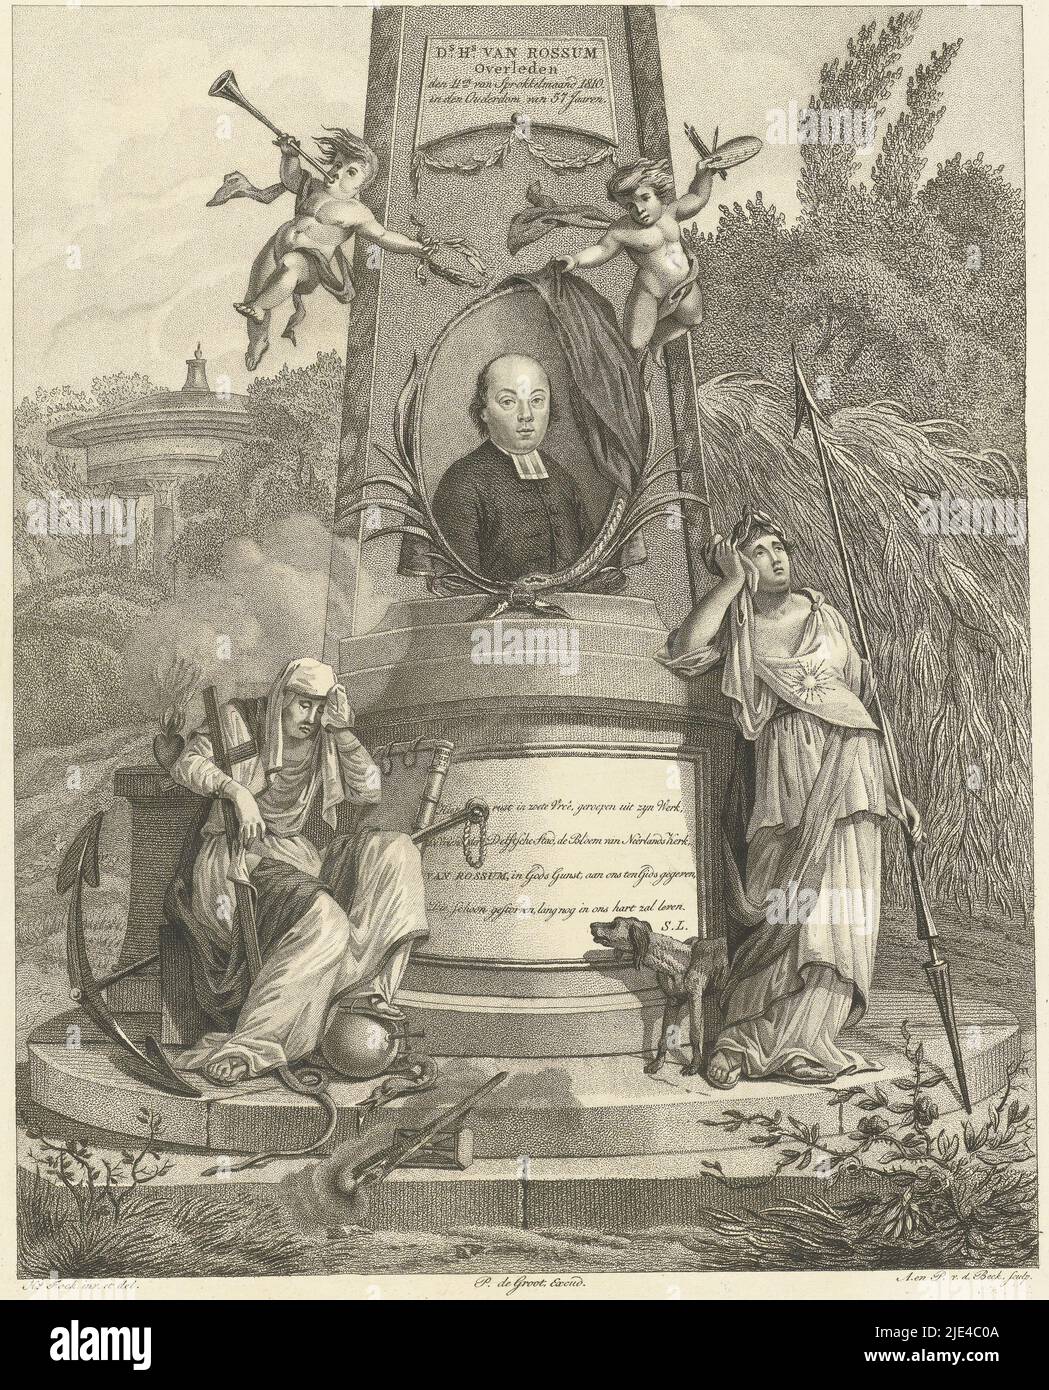 Monument commemorating the death of pastor Van Rossum in Delft with his portrait and two mourning allegorical women, Antonie and Pieter van der Beek, after Hermanus Fock, 1810, Monument commemorating the death of pastor Van Rossum in Delft with his portrait in oval frame on column. Two female allegorical figures mourn at the monument, on the left a woman sits with symbols of faith, hope and love and her foot resting on an orb. The other woman is holding a spear and has a star on her chest. On the base of the monument is a poem of praise., print maker: Antonie en Pieter van der Beek, (mentioned Stock Photo